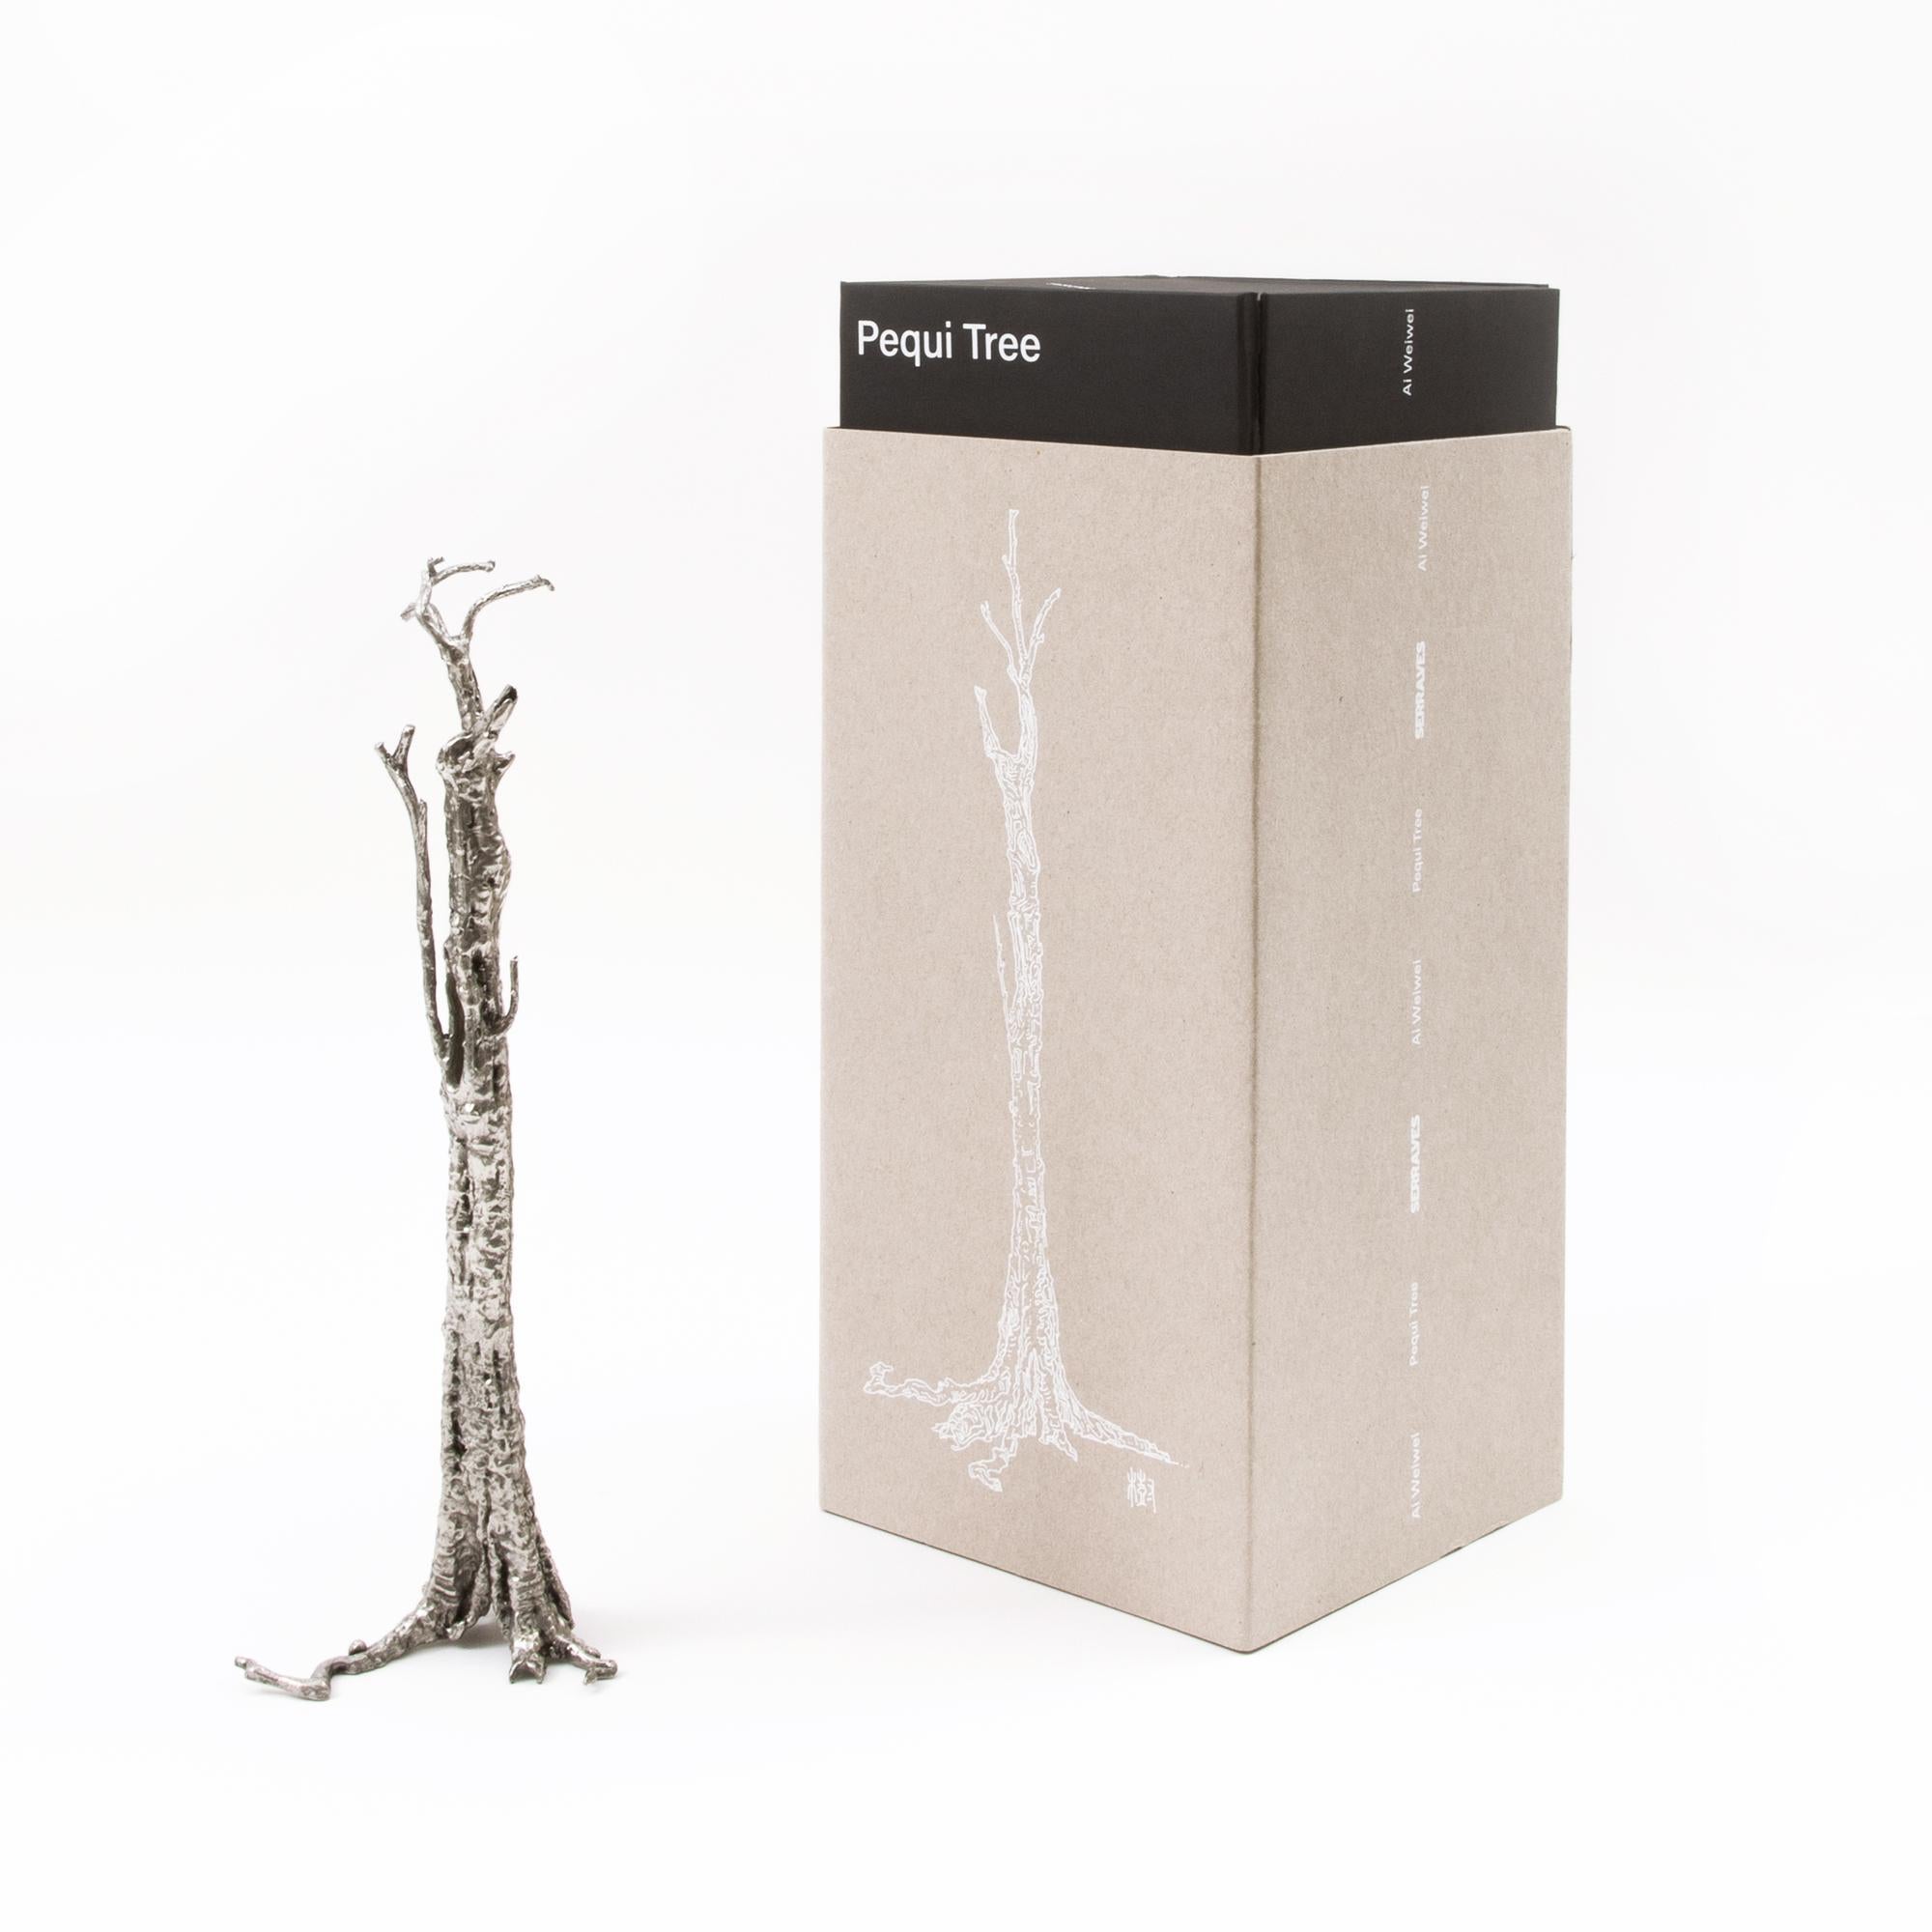 The Pequi Tree Miniature is based on Ai Weiwei's 32 meter sculpture, Pequi Tree from 2018-2020, and was produced at a 1/100 scale. As the large cast iron sculpture, the miniature witnesses the disappearance of the harmonious coexistence between